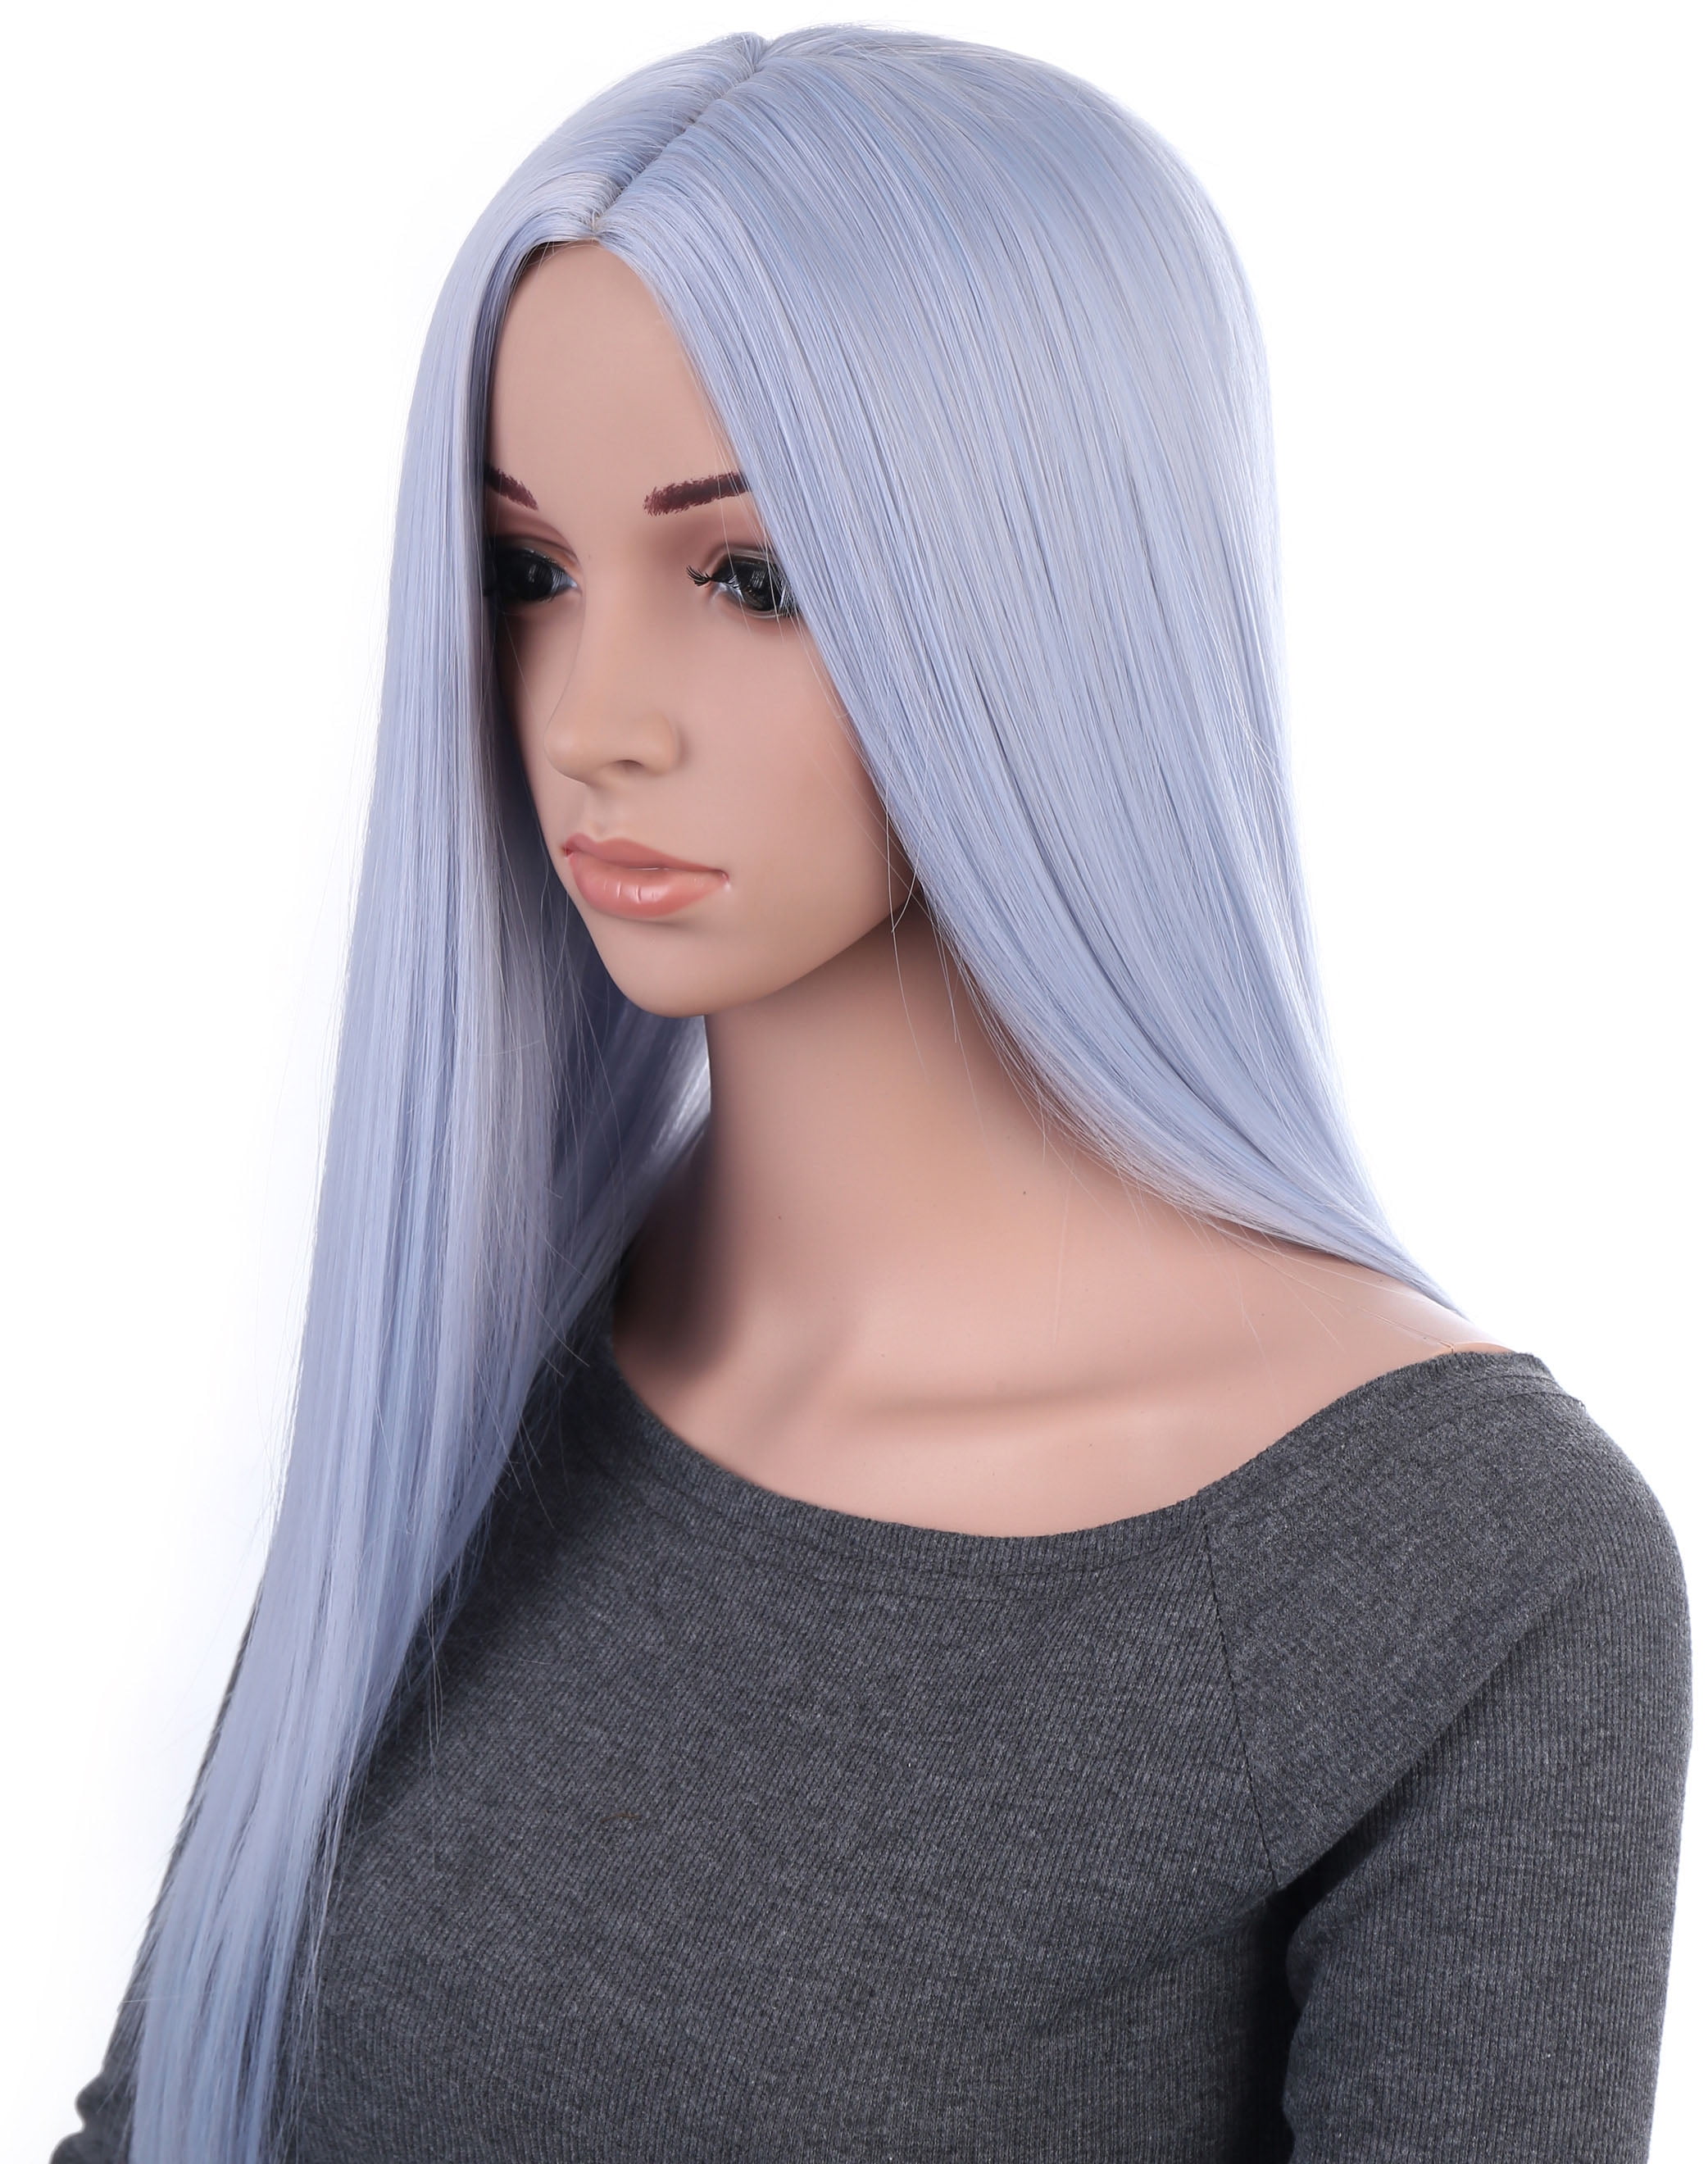 Details about   Rubie's Fashion Wigs Costume Blue Glamour Wig One Size Cosplay Blue Mermaid Hair 